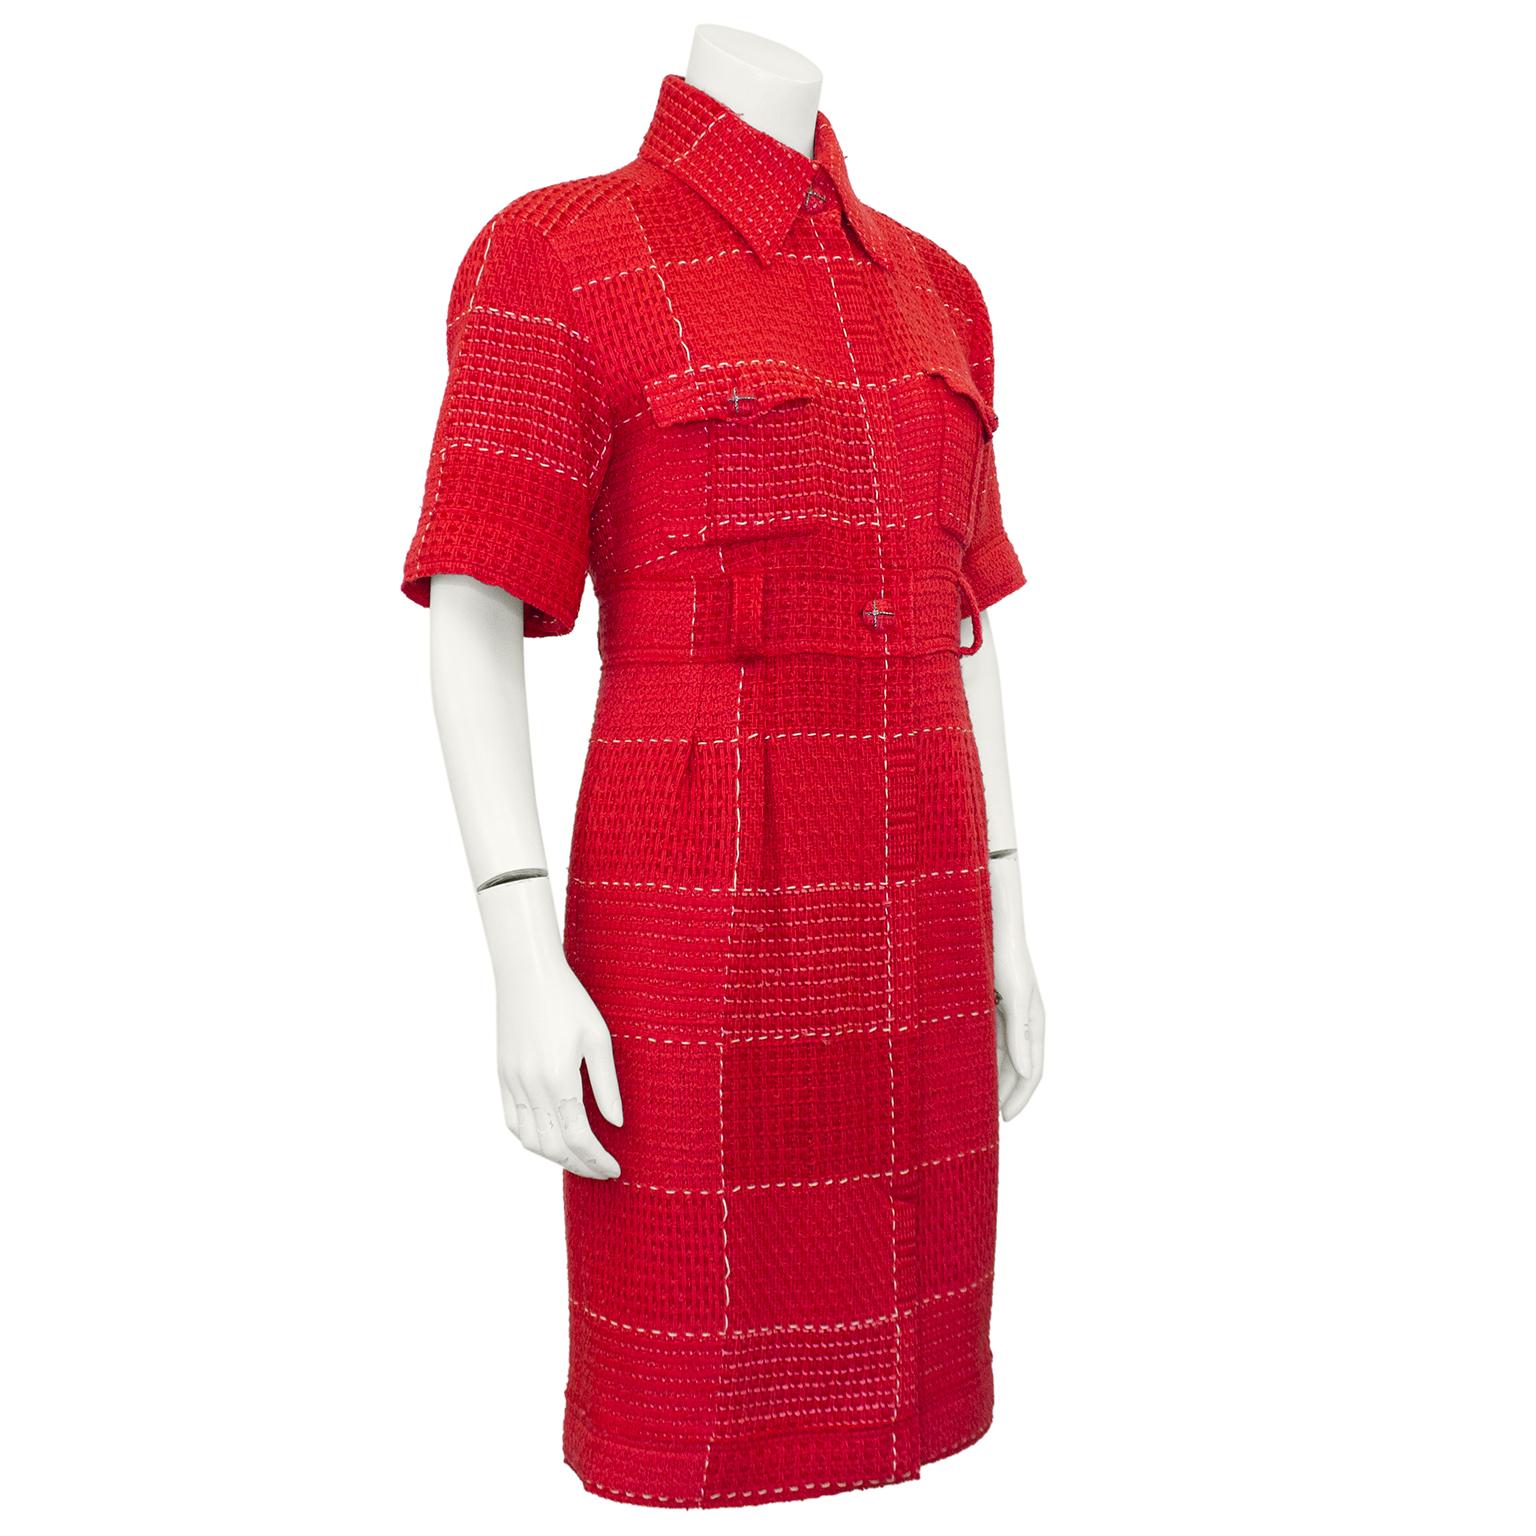 Chanel shirtdress from the Autumn 2007 runway collection. This dress was look 5/67 on the runway under the glass dome of the Grand Palais, and worn by Behati Prinsloo. Vibrant red wool tweed with white top stitching creating squares, so the entire